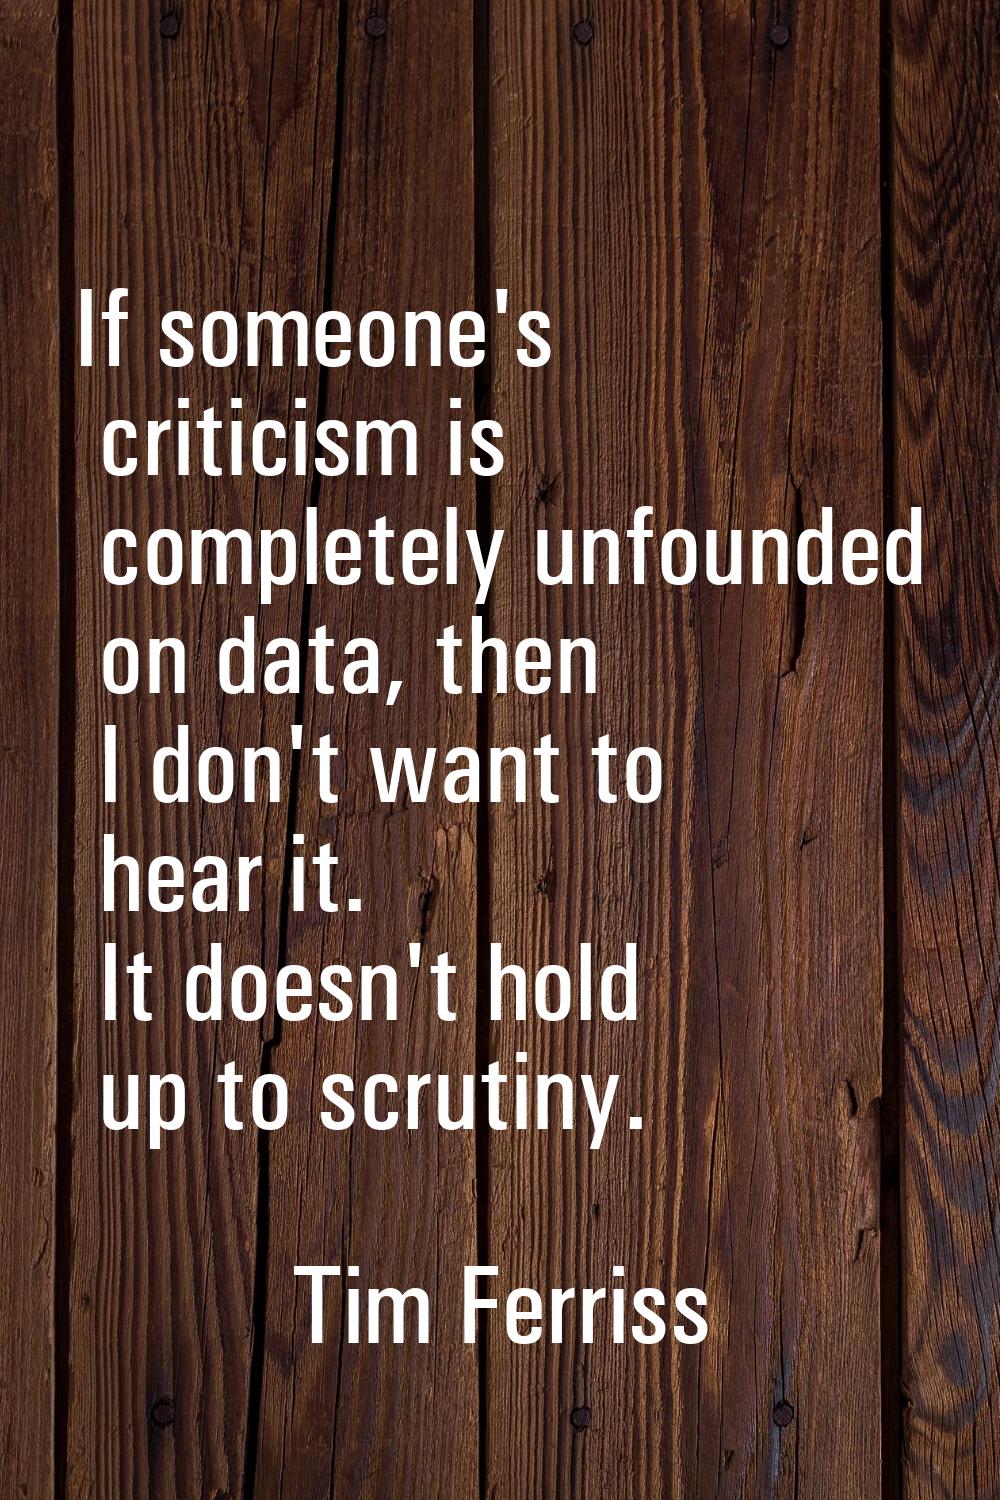 If someone's criticism is completely unfounded on data, then I don't want to hear it. It doesn't ho